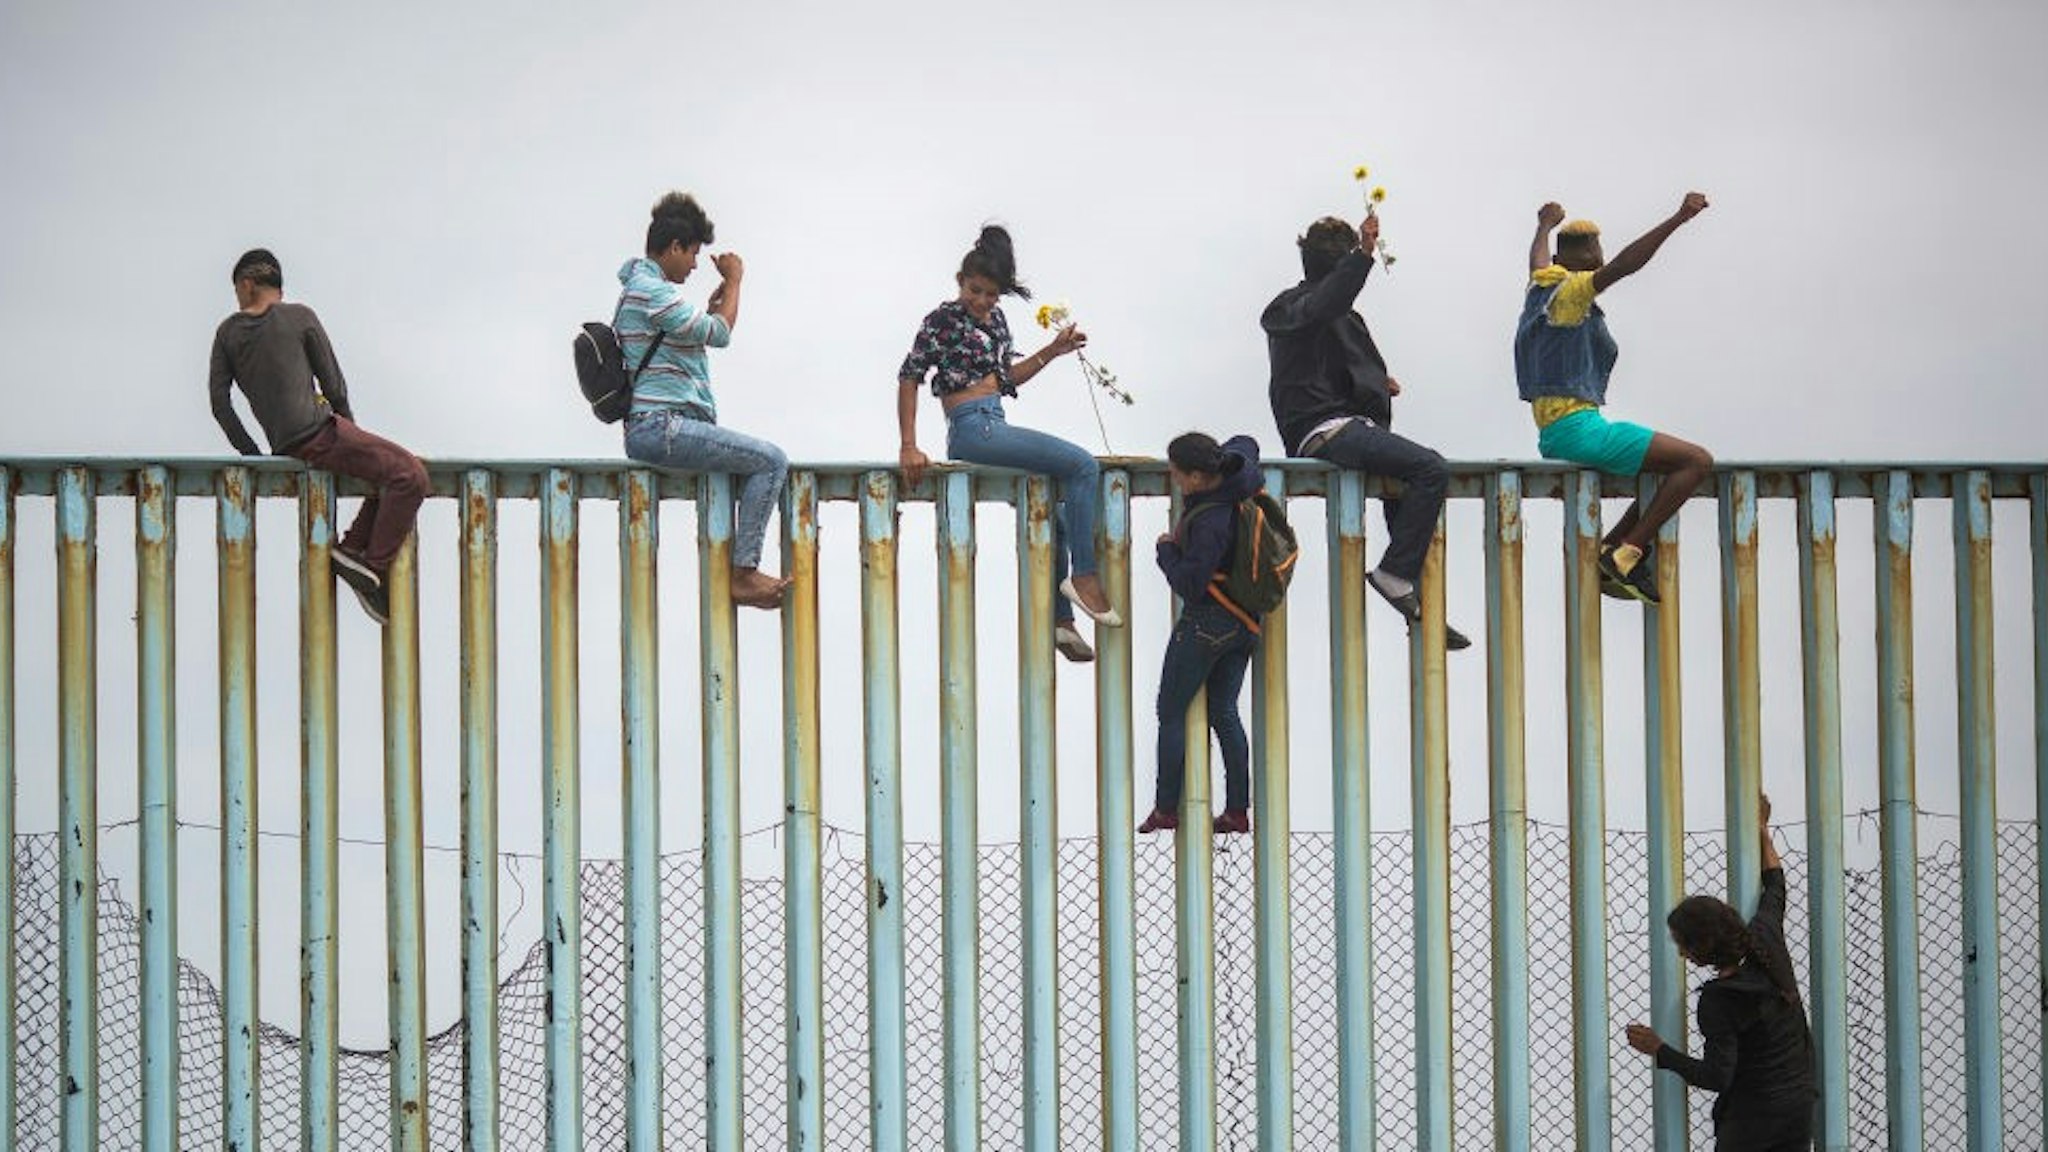 TIJUANA, MEXICO - APRIL 29: People climb a section of border fence to look toward supporters in the U.S. as members of a caravan of Central American asylum seekers arrive to a rally on April 29, 2018 in Tijuana, Baja California Norte, Mexico. More than 300 immigrants, the remnants of a caravan of Central Americans that journeyed across Mexico to ask for asylum in the United States, have reached the border to apply for legal entry. (Photo by